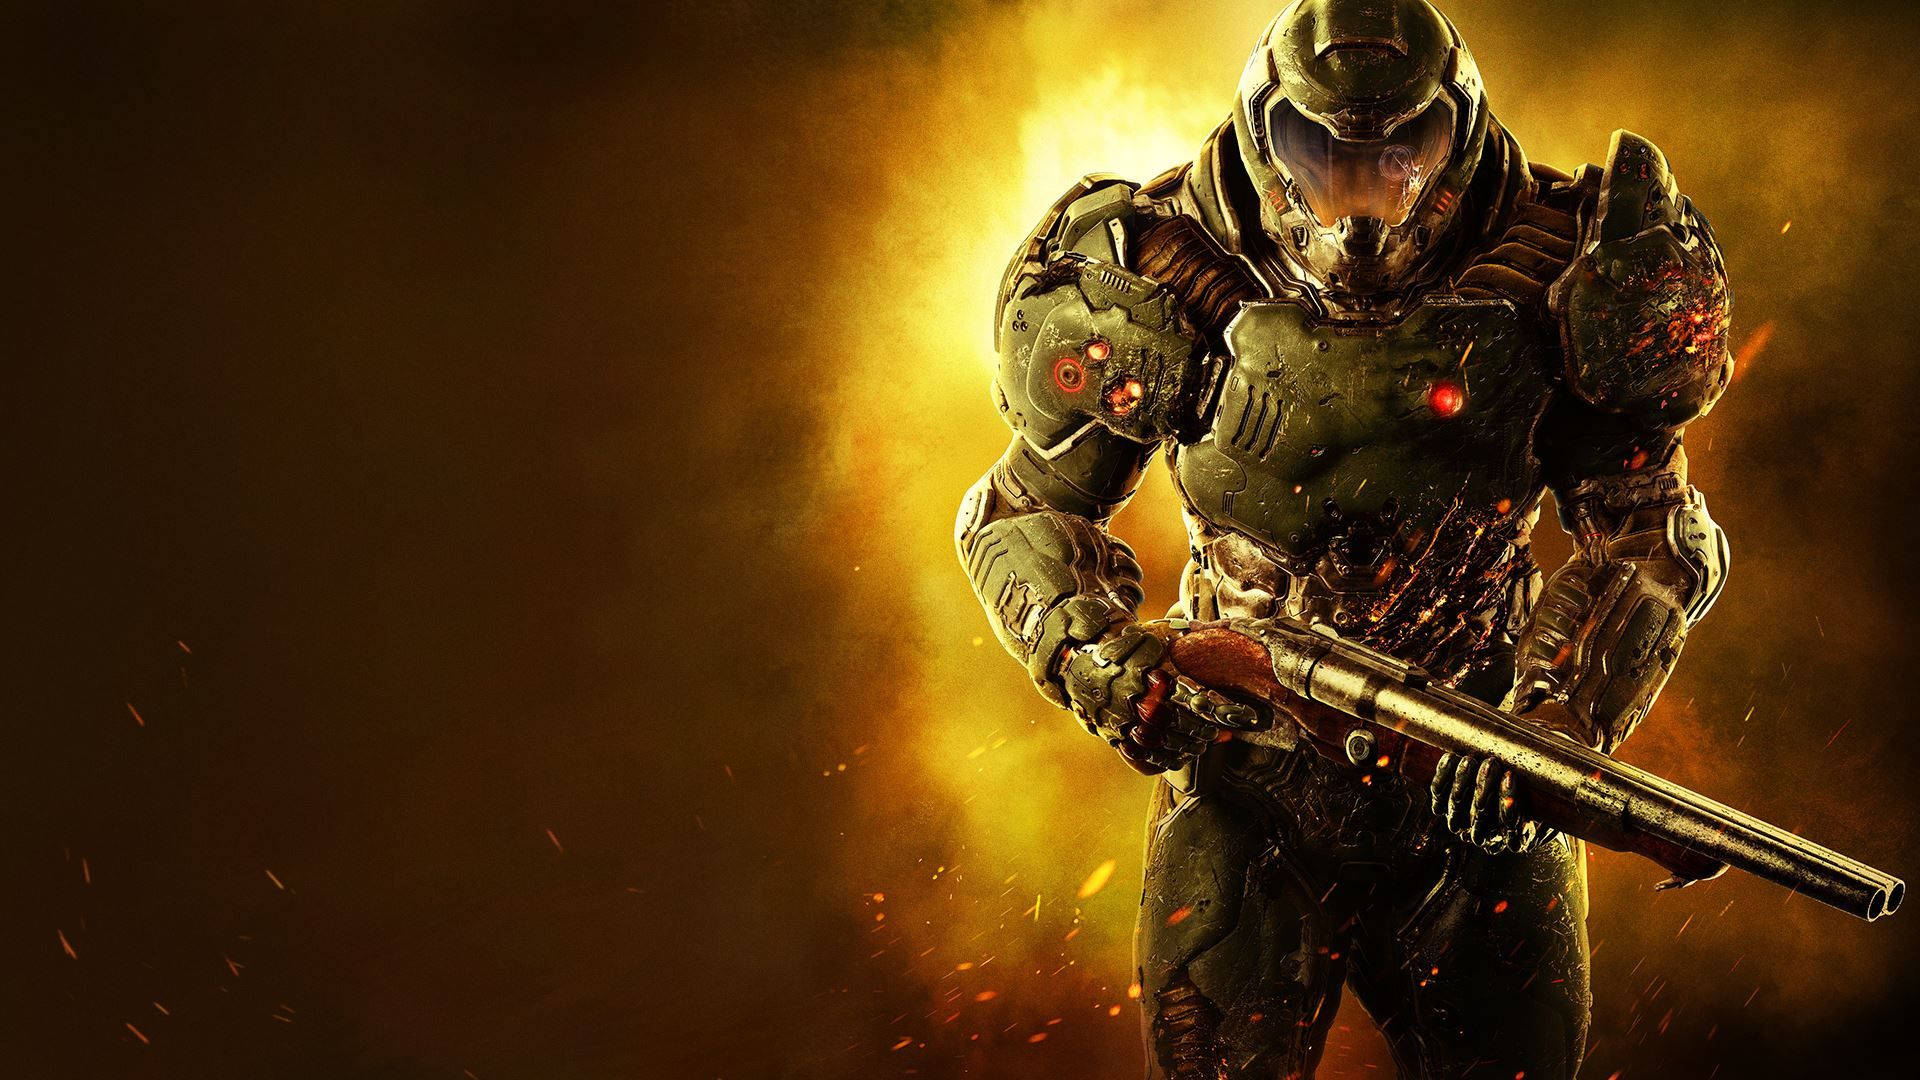 Experience the Thrilling Action of DOOM Wallpaper